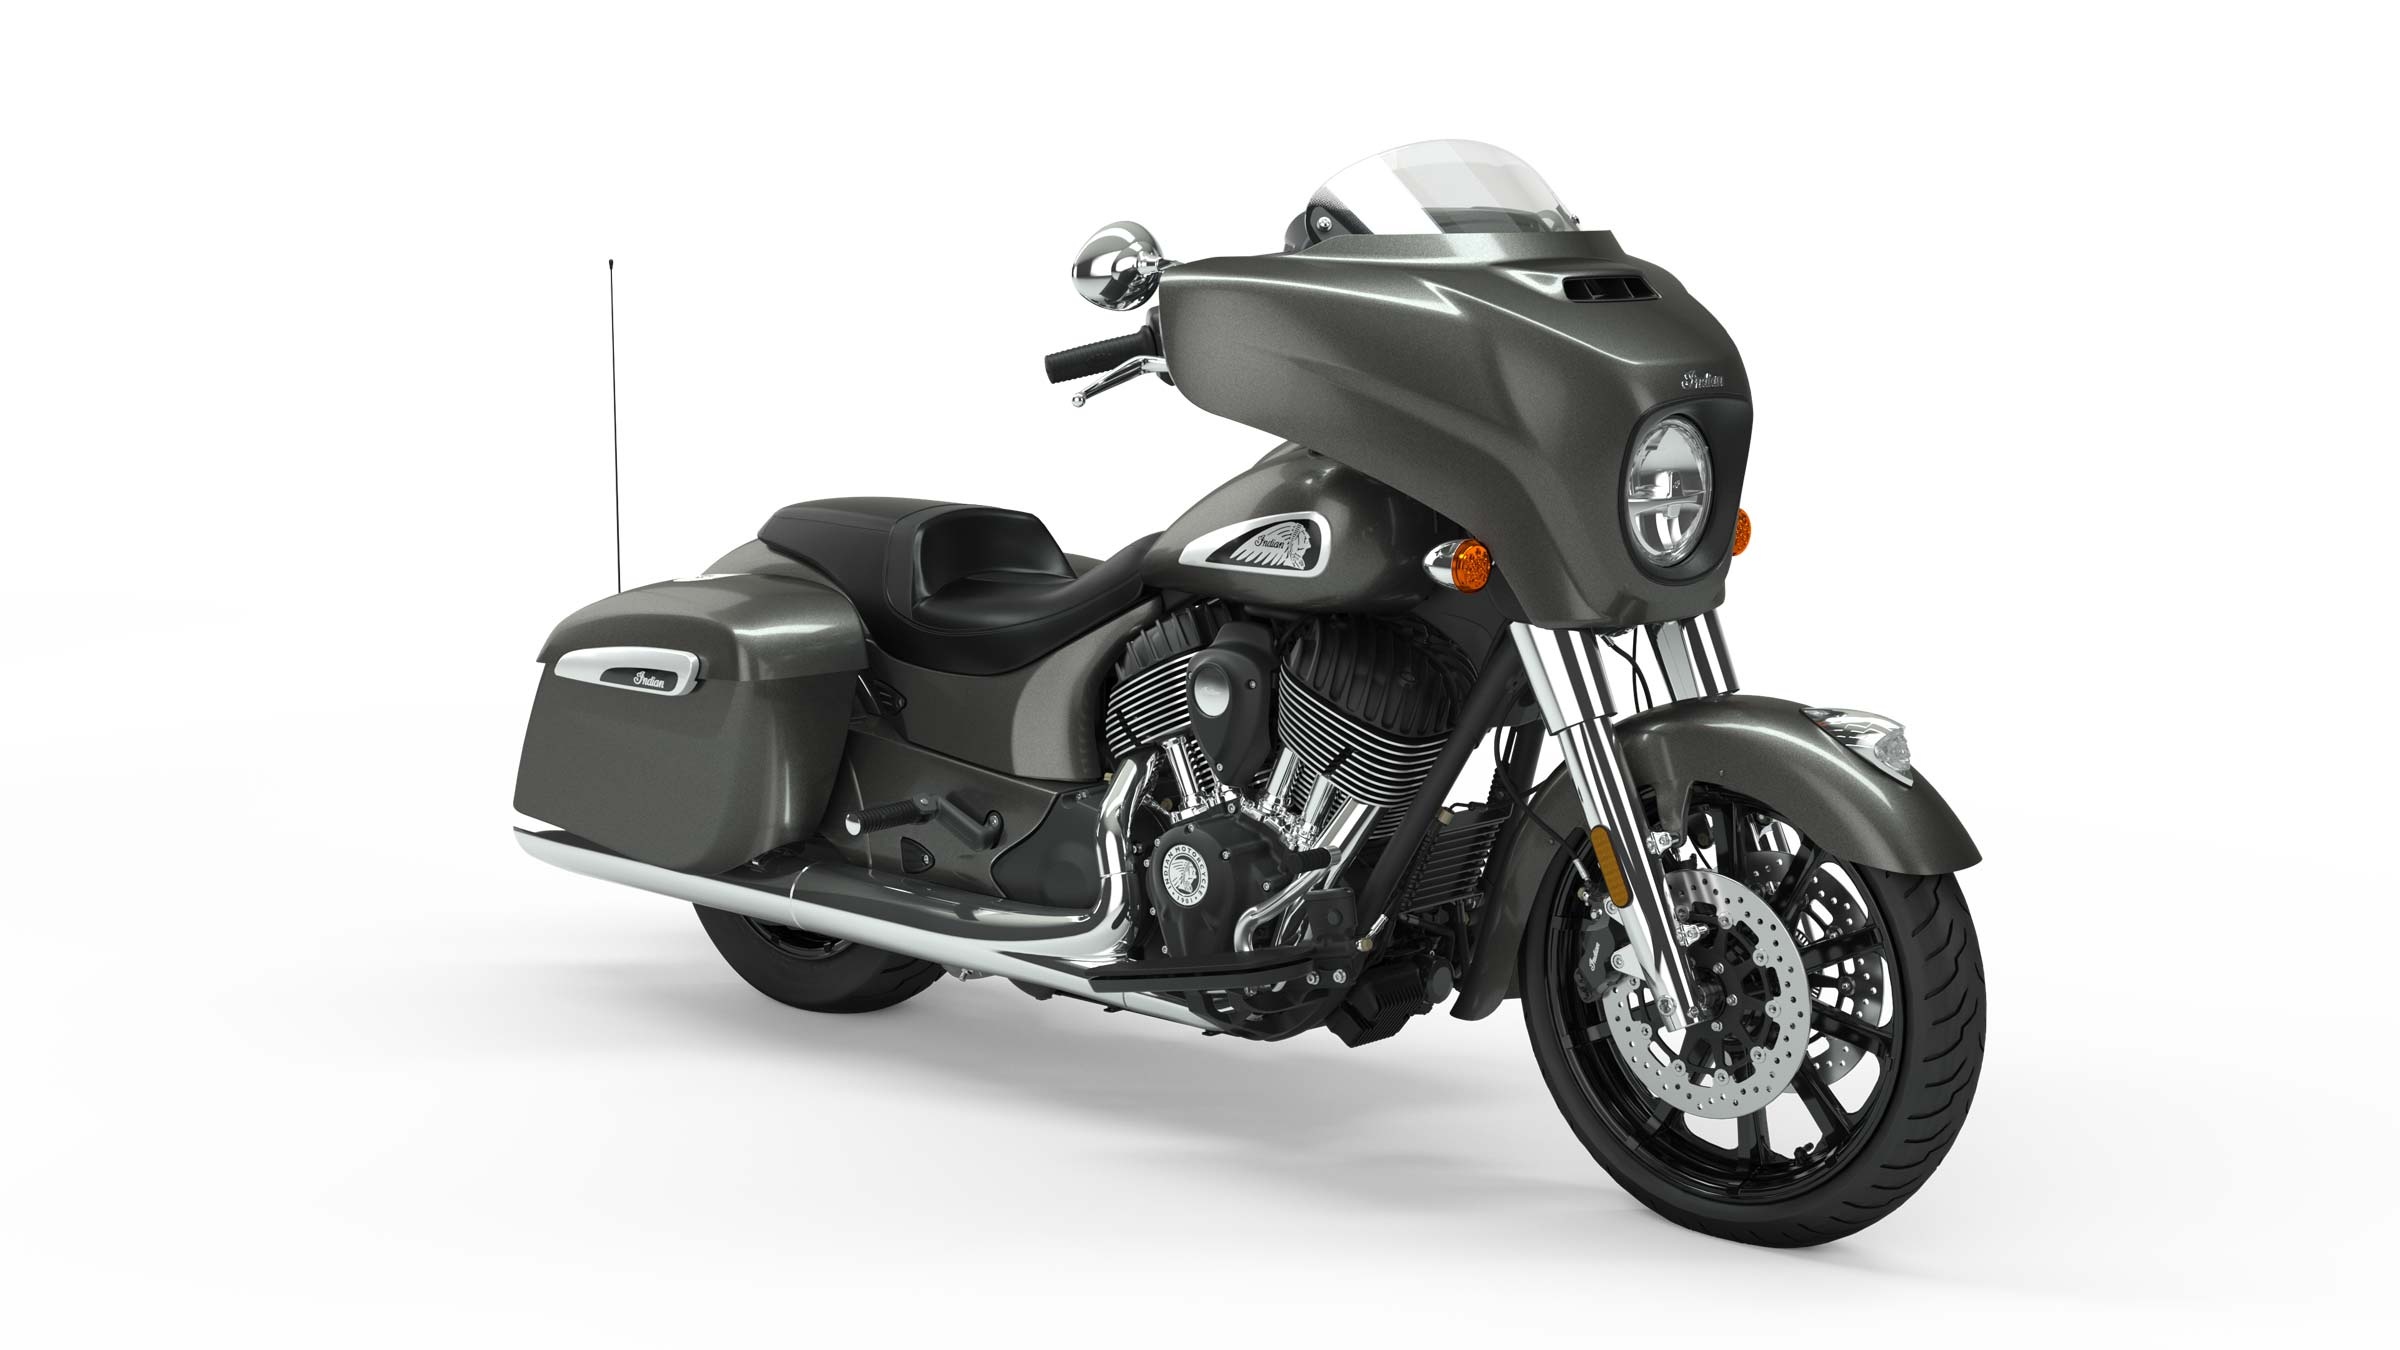 Indian Chieftain Limited, Striking visuals, Free wallpaper download, Auto enthusiasts, 2400x1350 HD Desktop